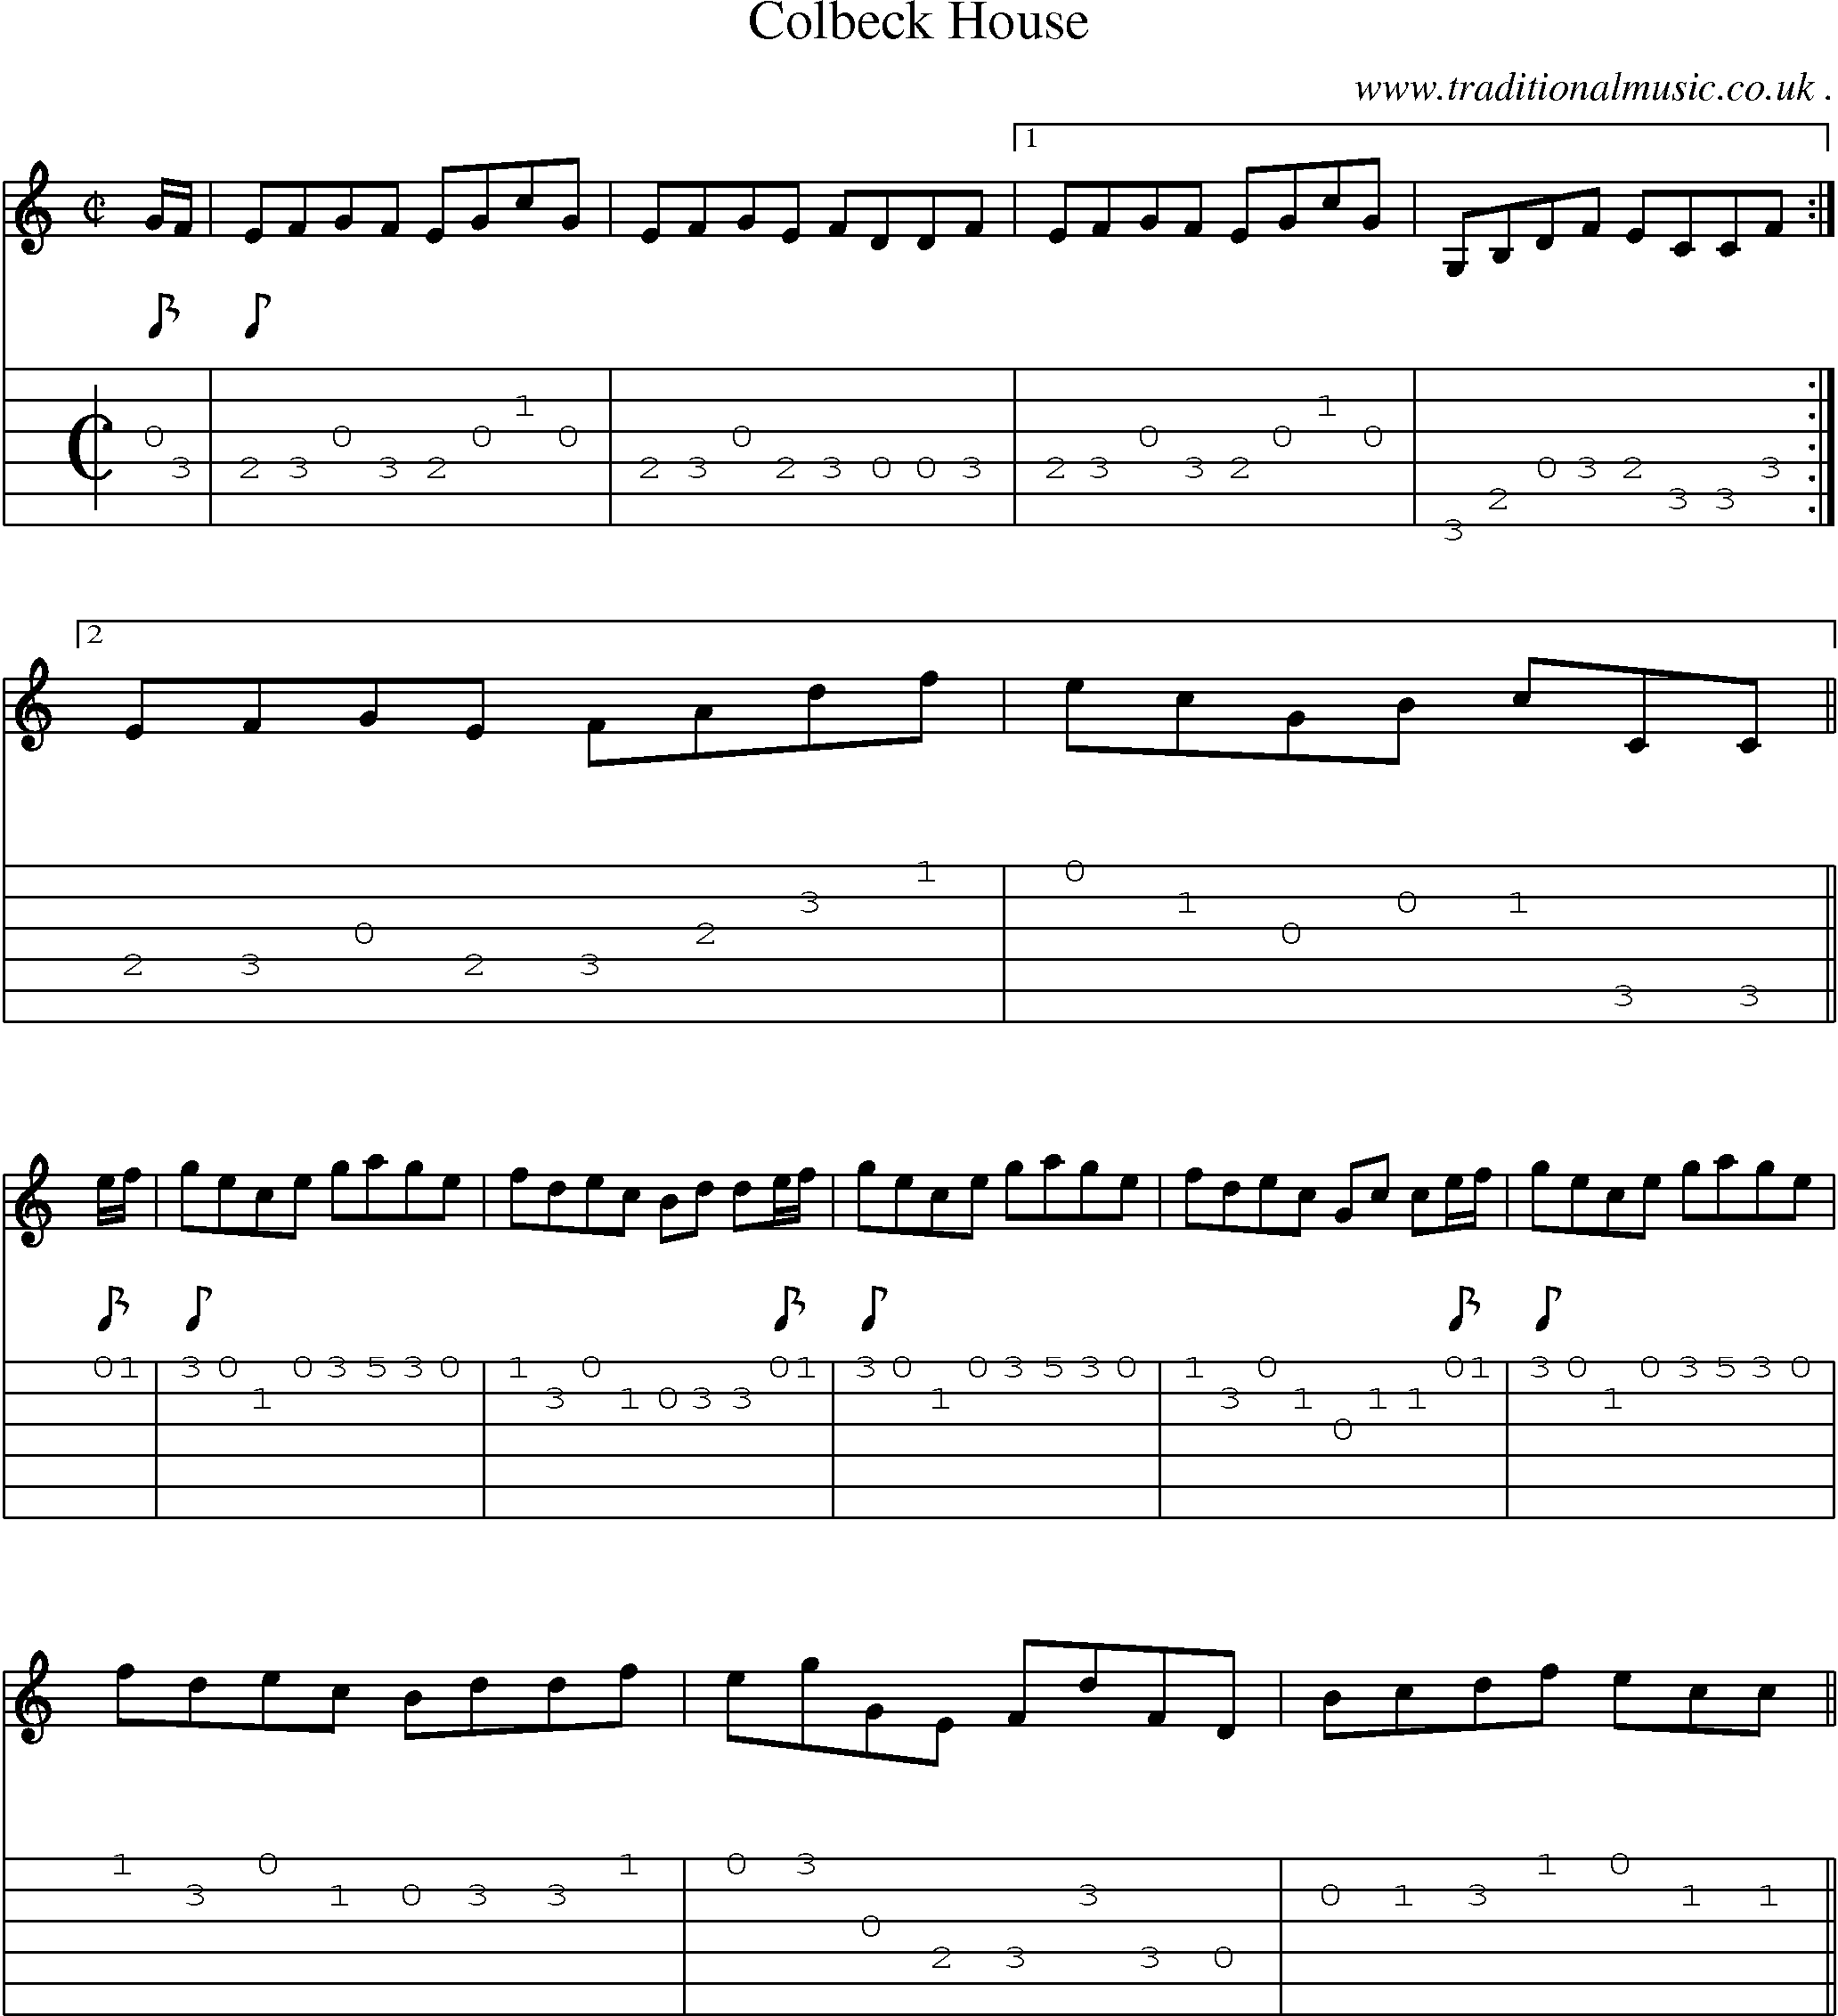 Sheet-music  score, Chords and Guitar Tabs for Colbeck House